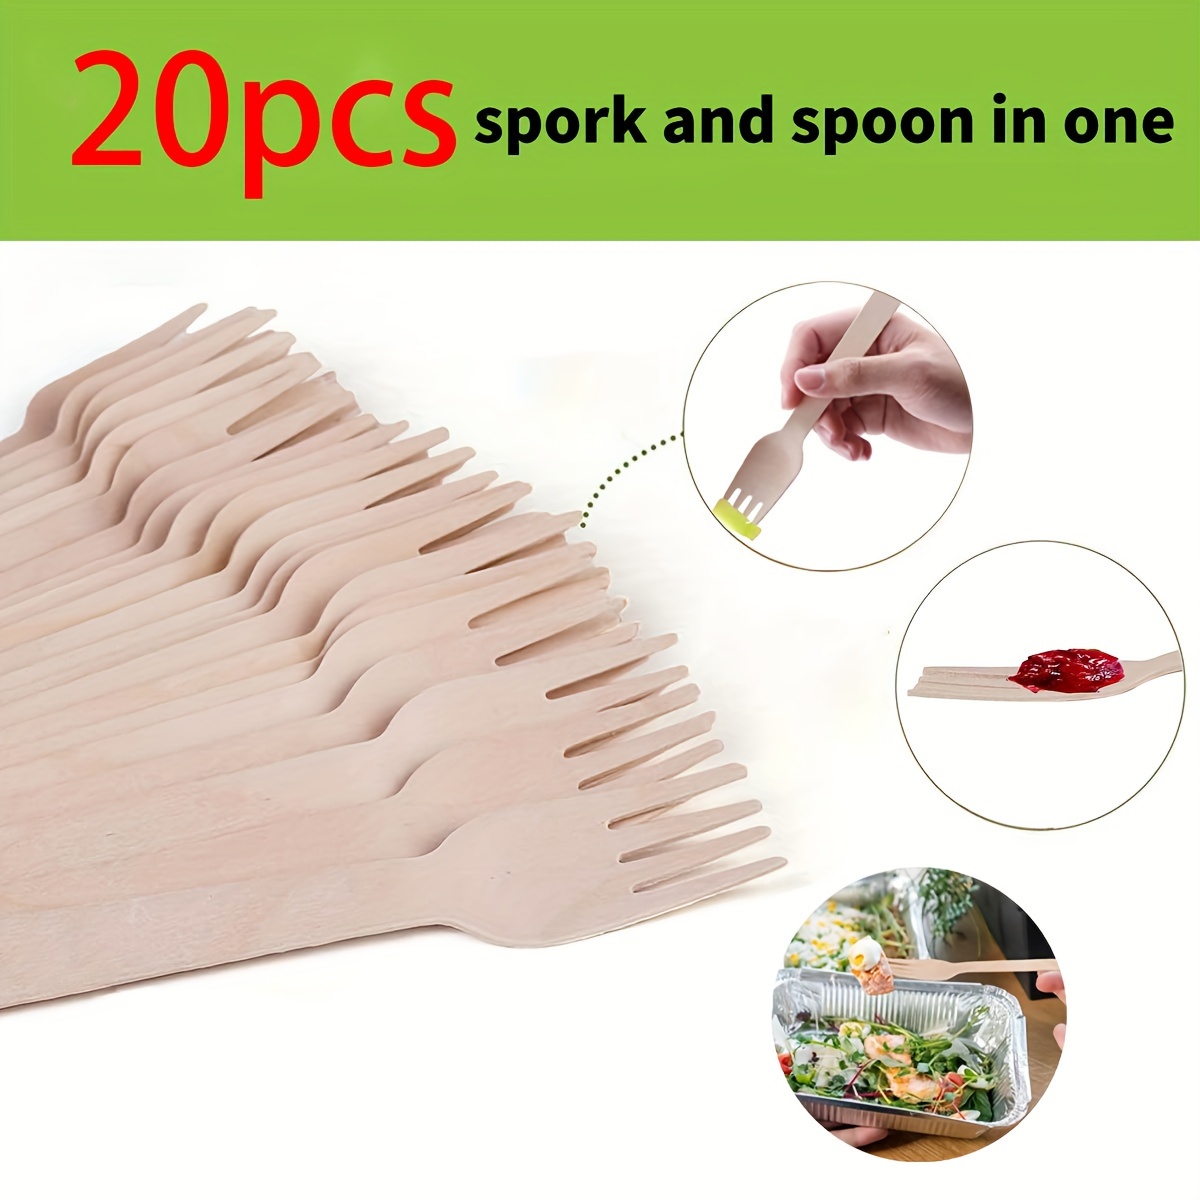 

20pcs Disposable Wooden Forks, Biodegradable Wooden Forks, Fruit Forks, Dessert Forks, For Family Dinner Parties And Restaurant Events, Party Supplies, Tableware Accessories